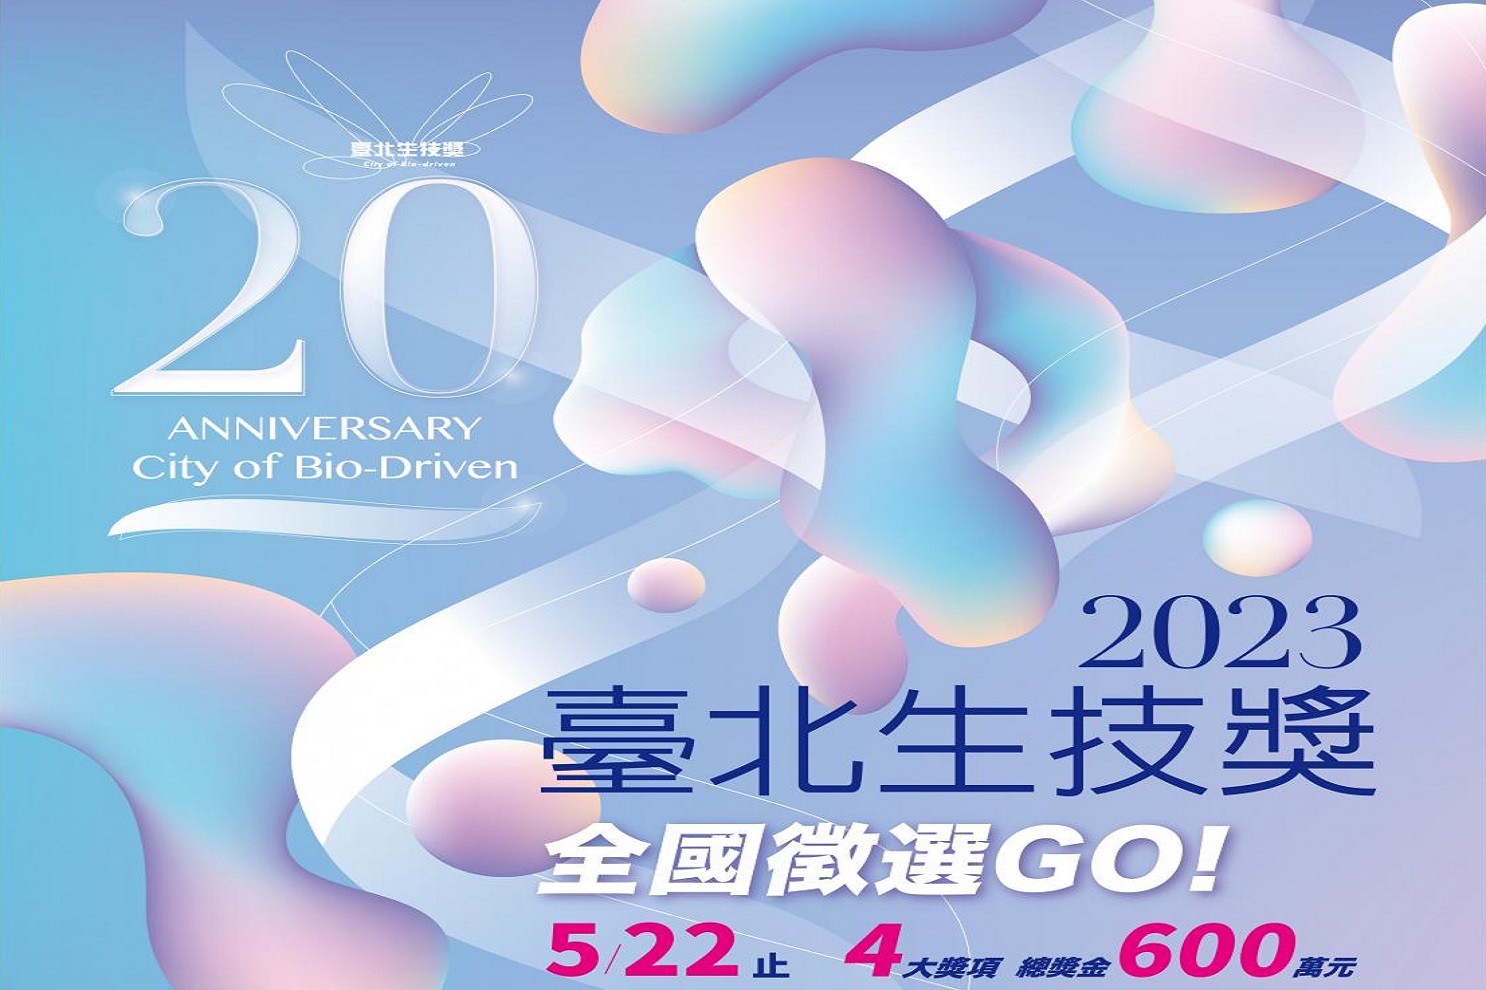 The 2023 Taipei Biotech Awards National Call for Submissions Begins